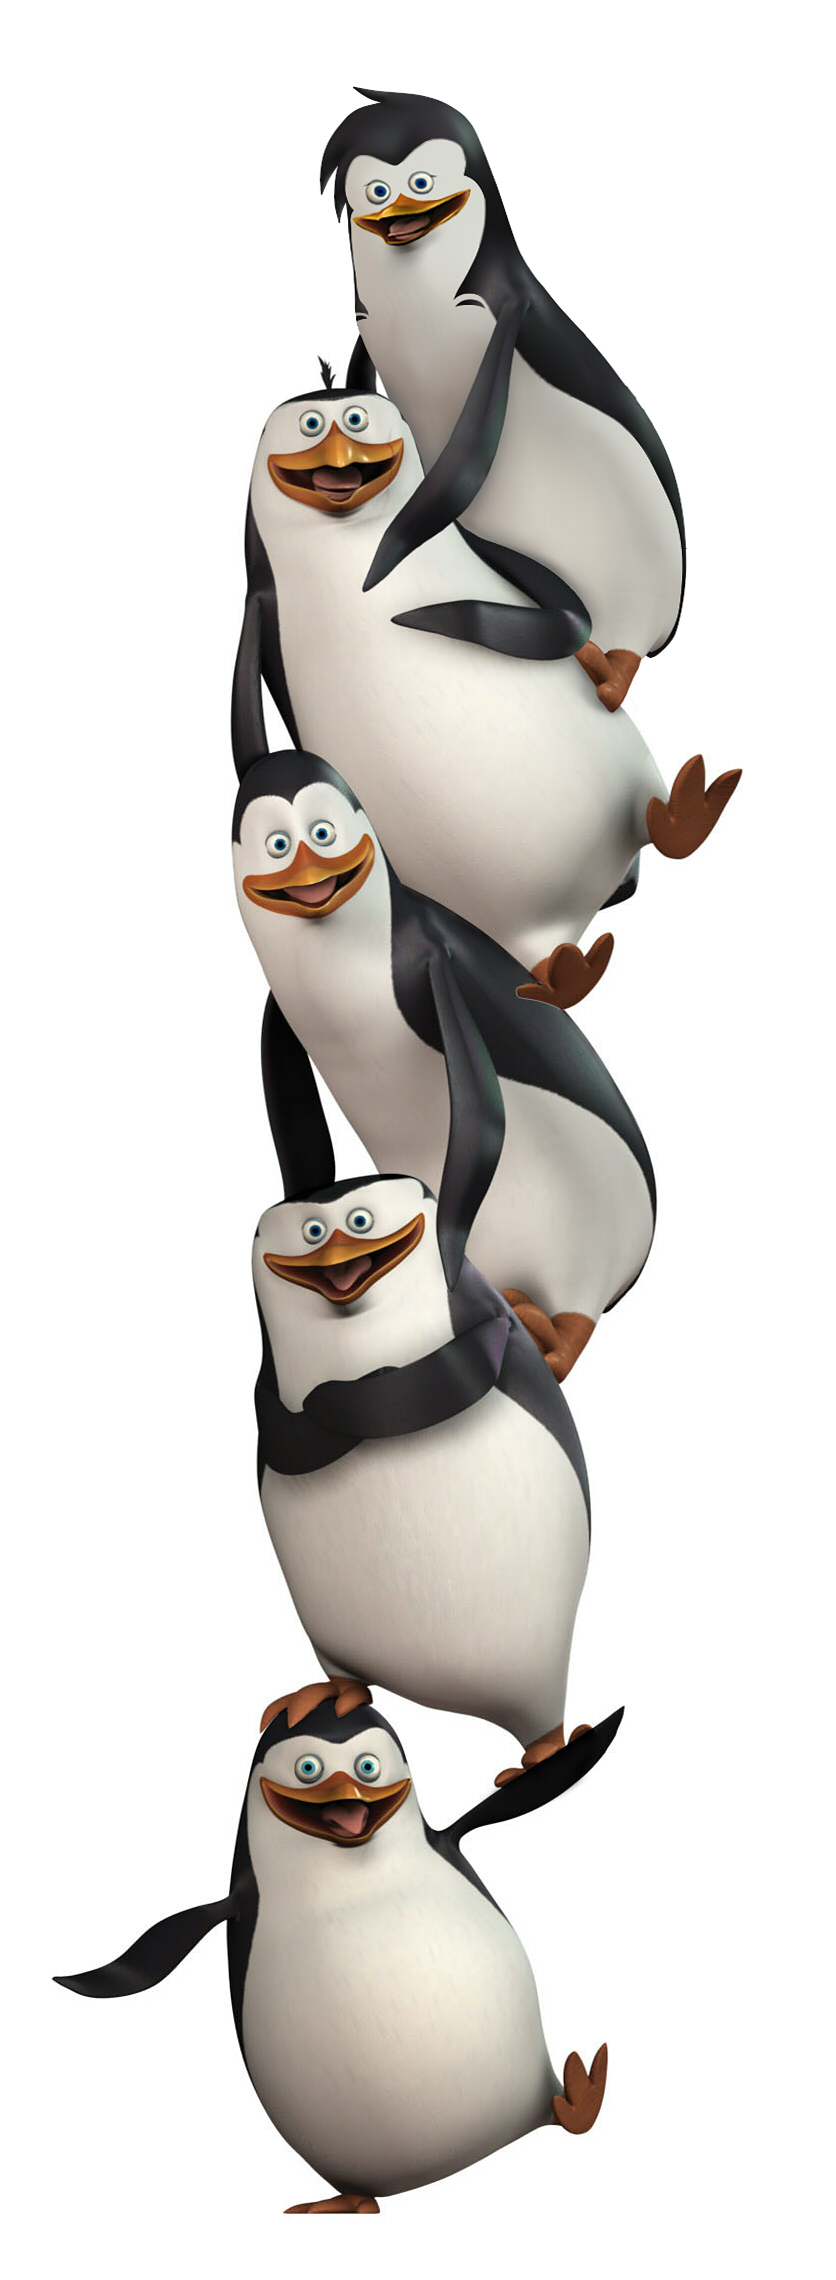 . ClipartLook.com Agnes penguin   penguins of madagascar by Djeyd-VIP-9th